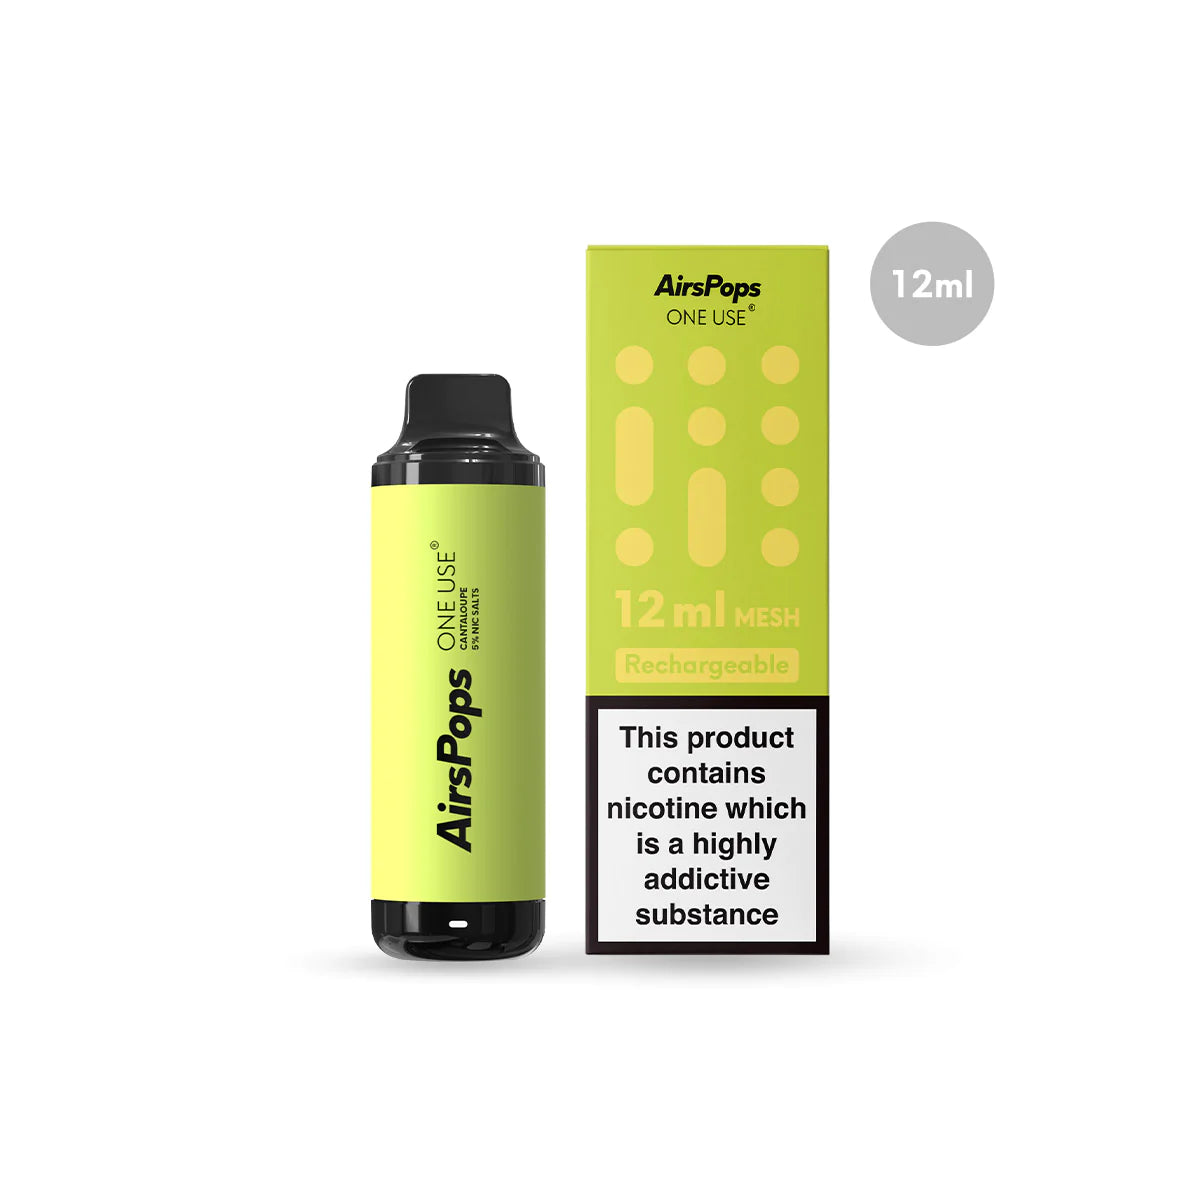 AirsPops ONE USE 12ml MESH Disposable